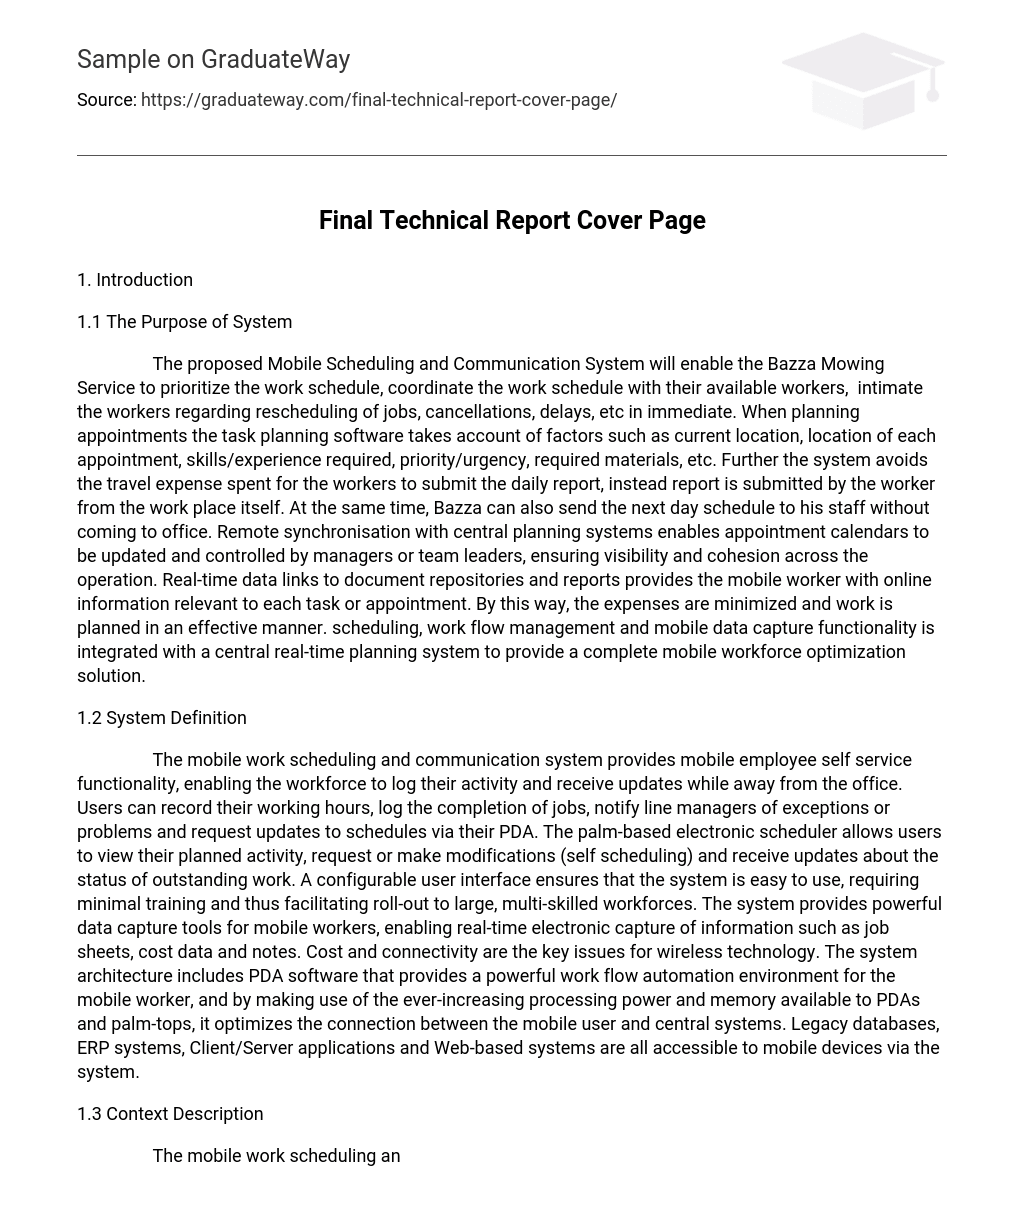 Final Technical Report Cover Page